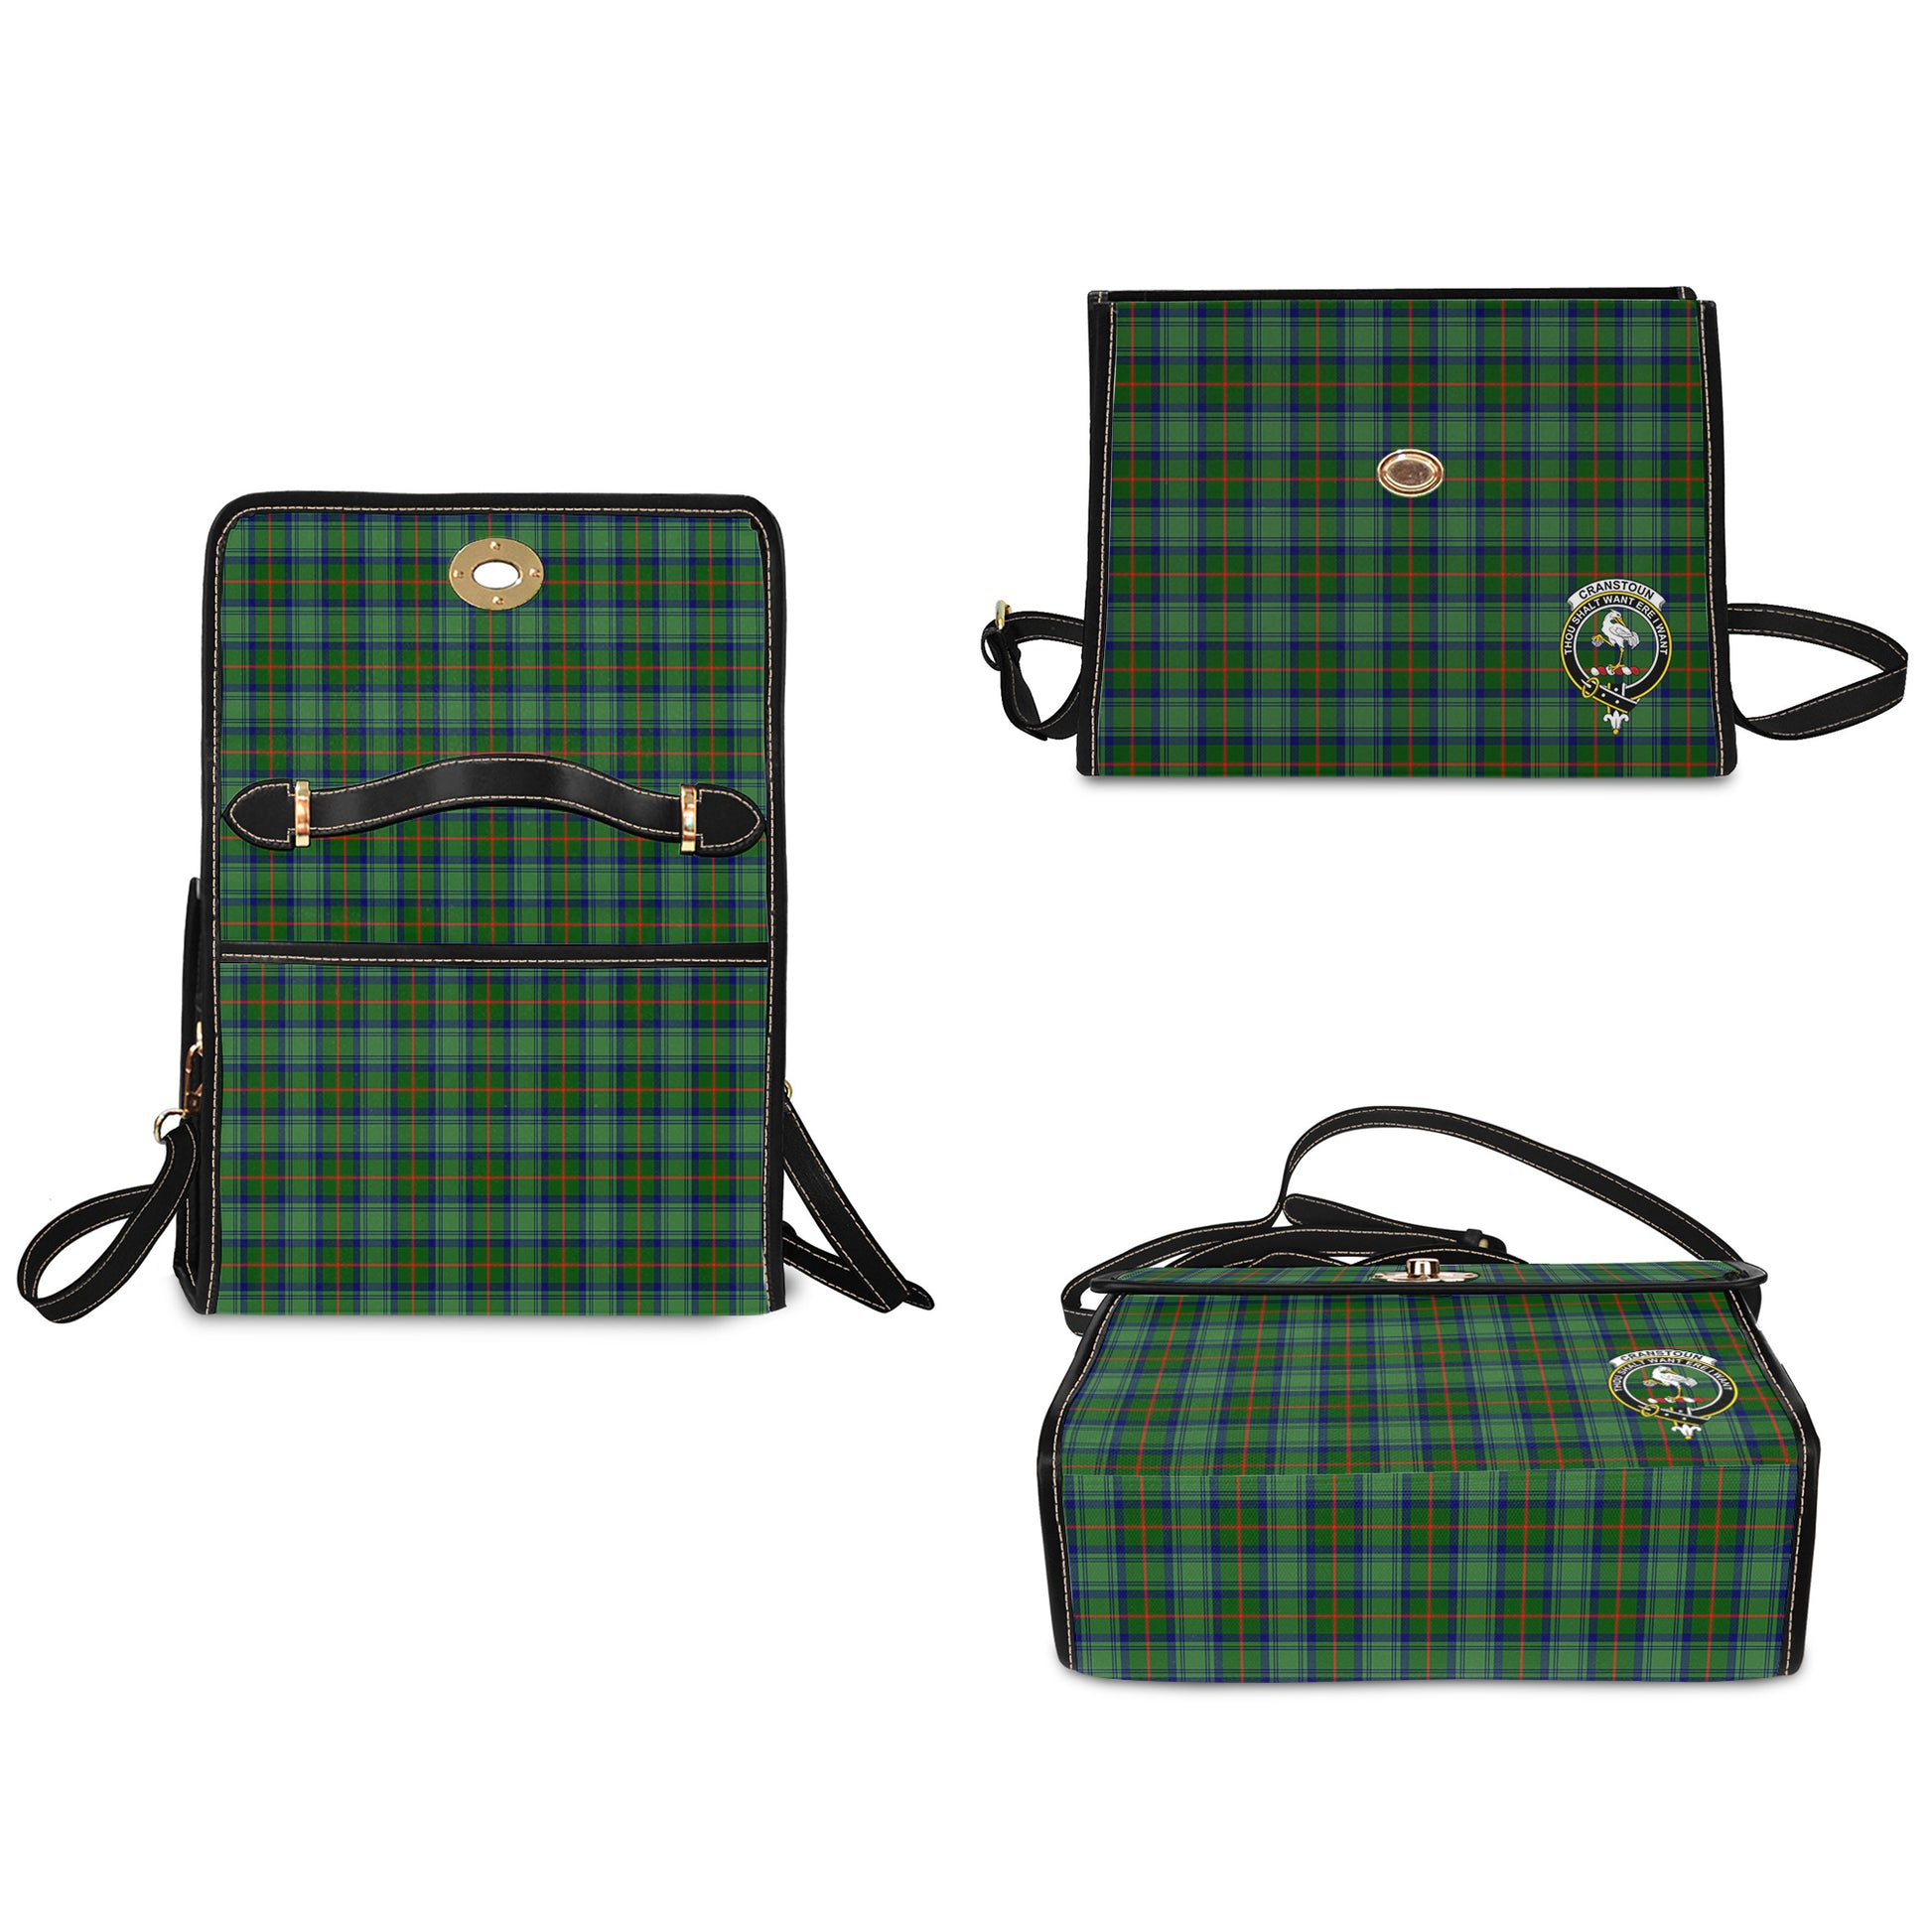 cranstoun-tartan-leather-strap-waterproof-canvas-bag-with-family-crest